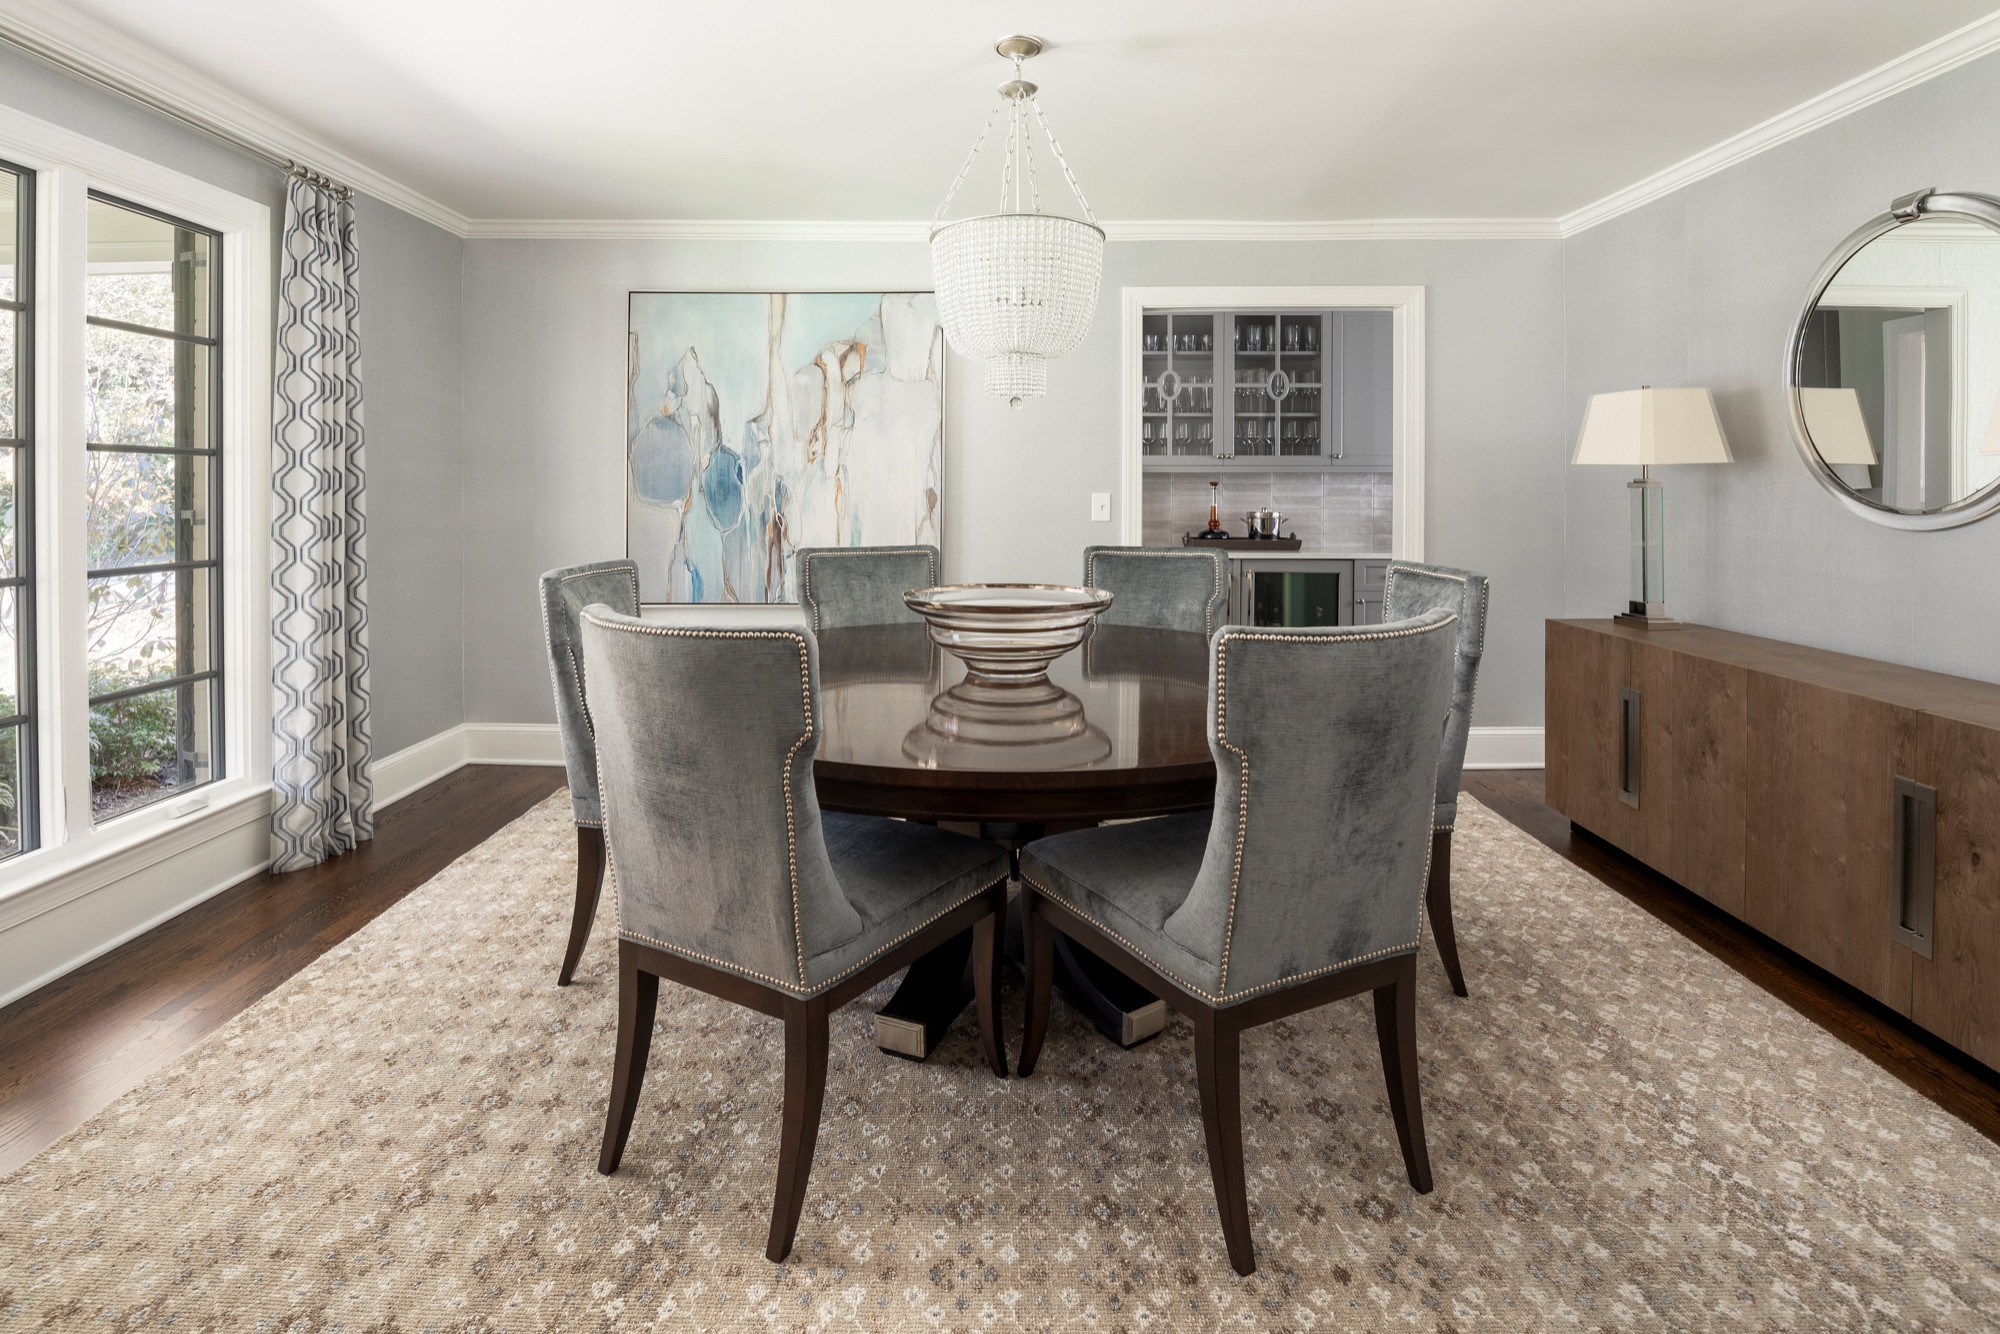 75 Transitional Dining Room Ideas You'll Love - September, 2023 | Houzz